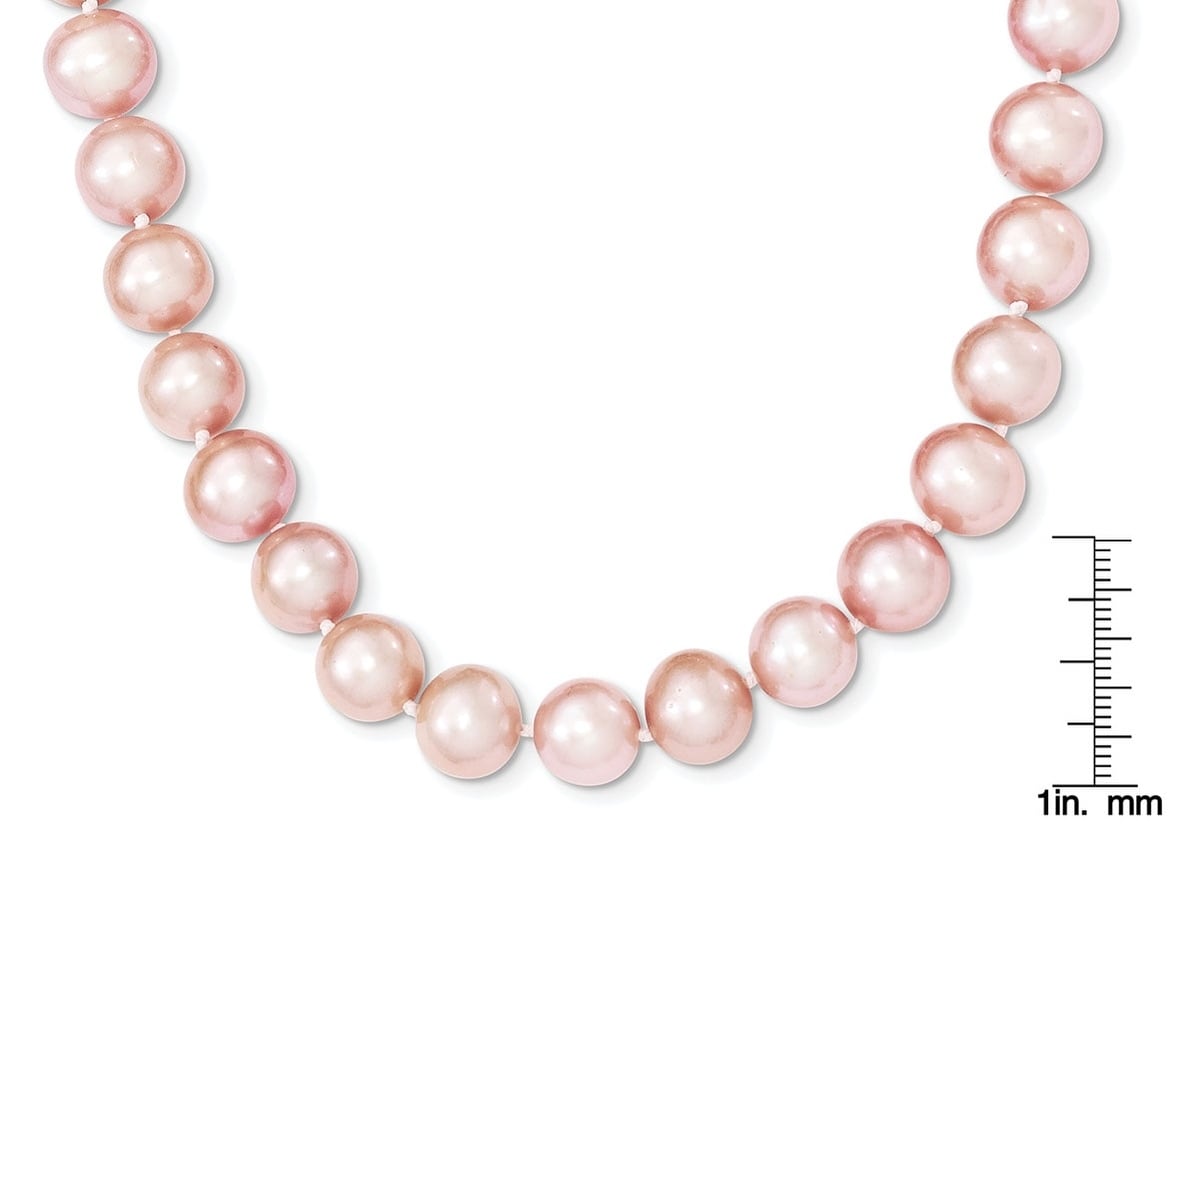 pink cultured pearl necklace